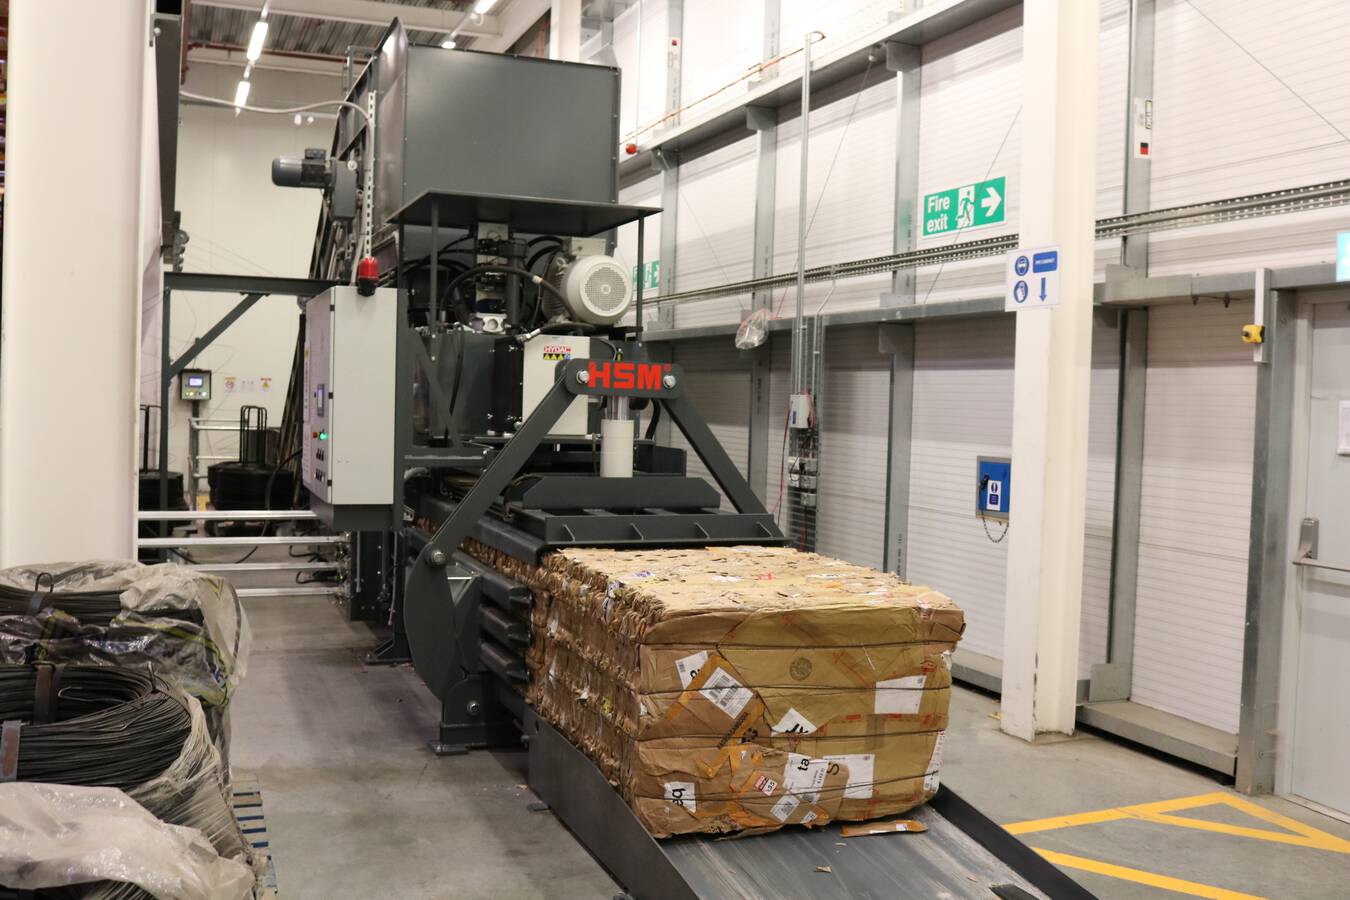 Recycling plays a crucial role at Sports Direct’s distribution centre 